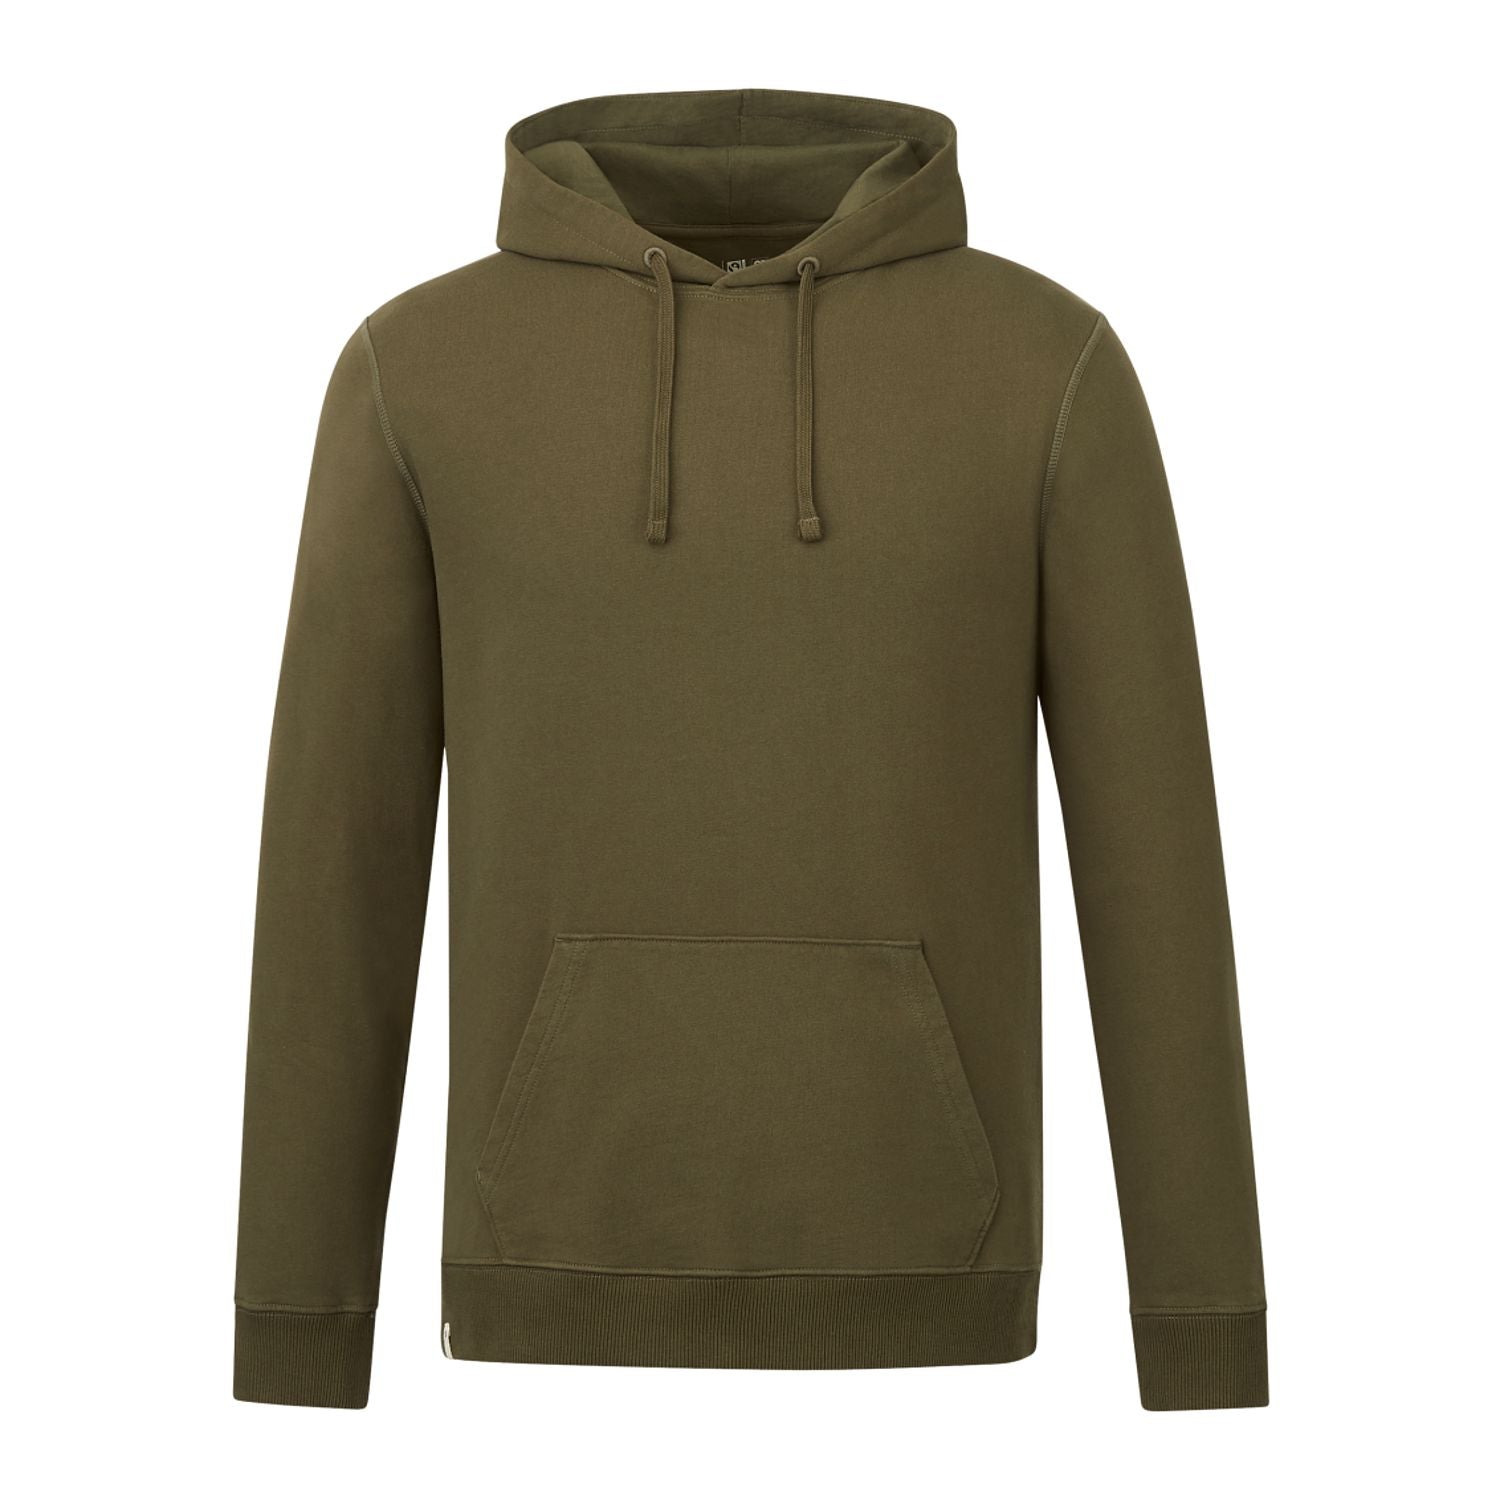 Customizable Tentree men's organic cotton french terry classic hoodie in green.